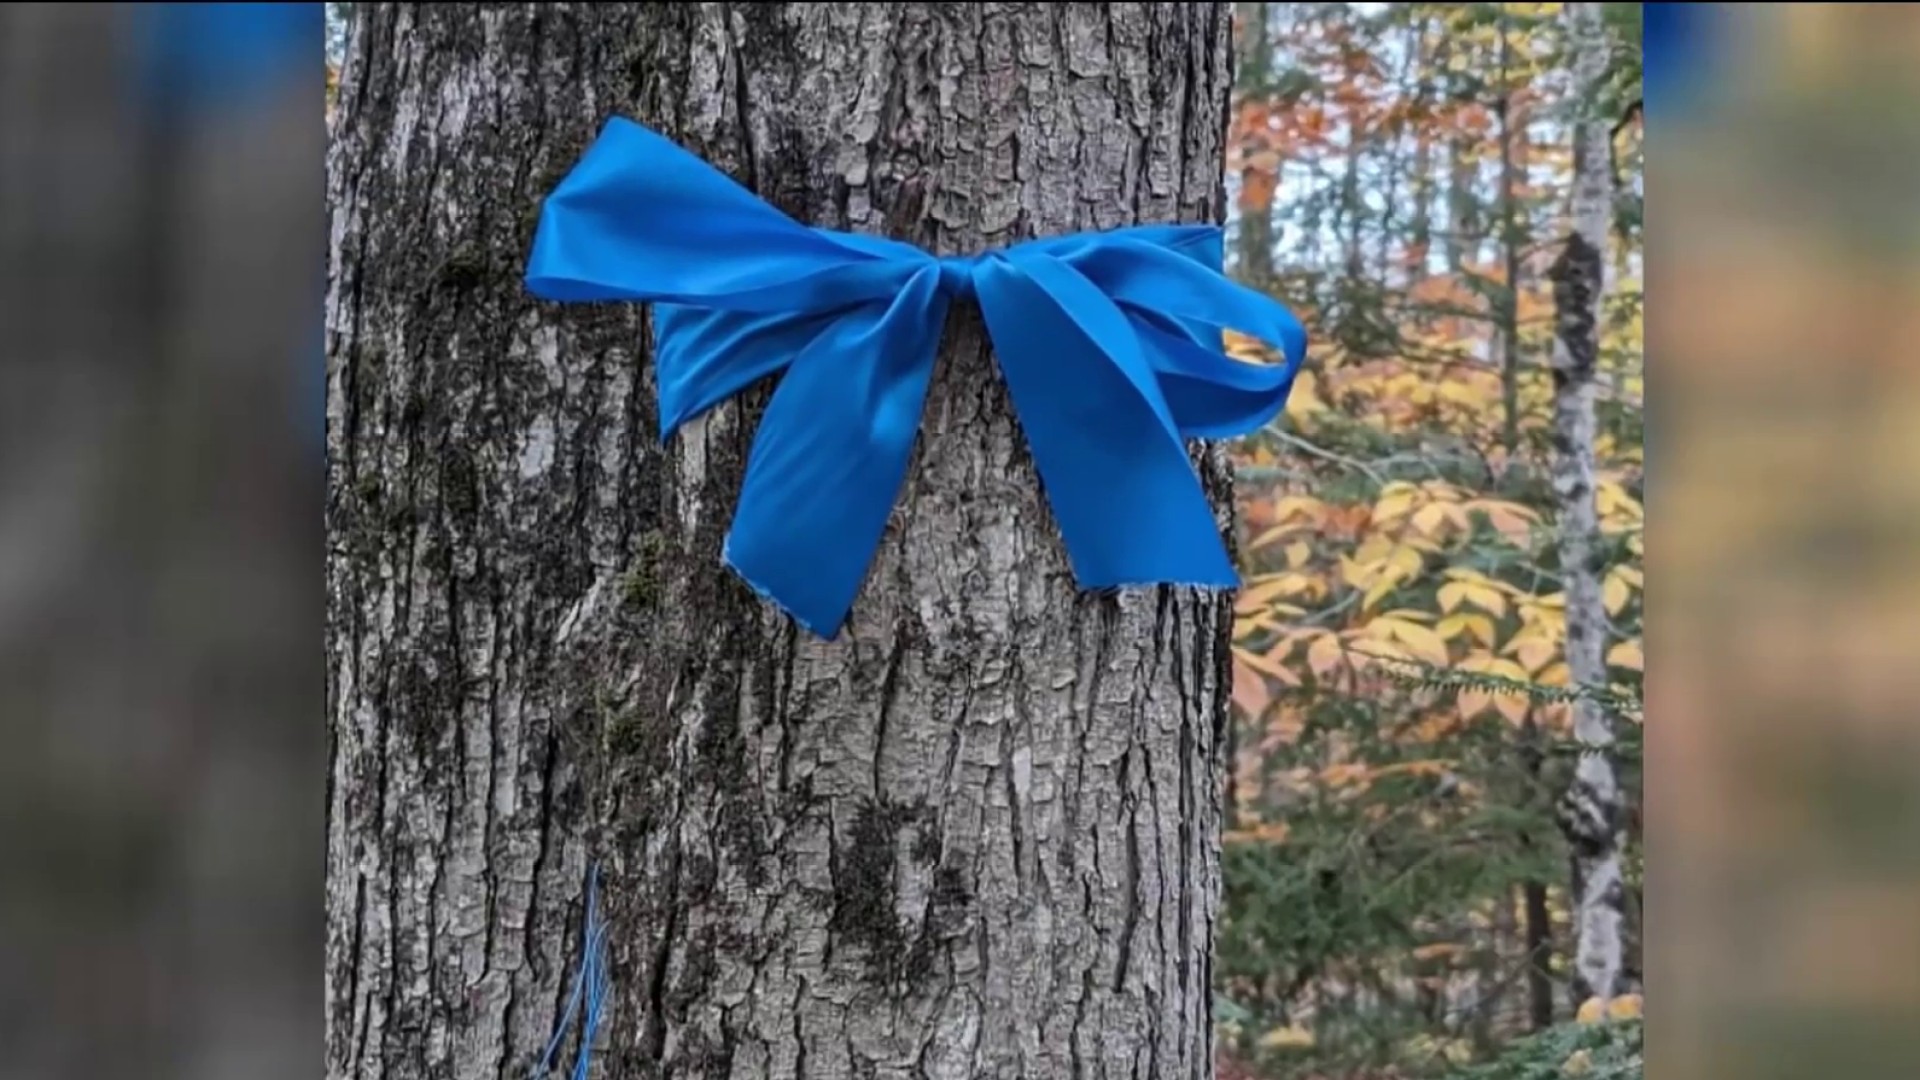 A small symbol of solidarity for the synagogue massacre trial: Blue ribbons